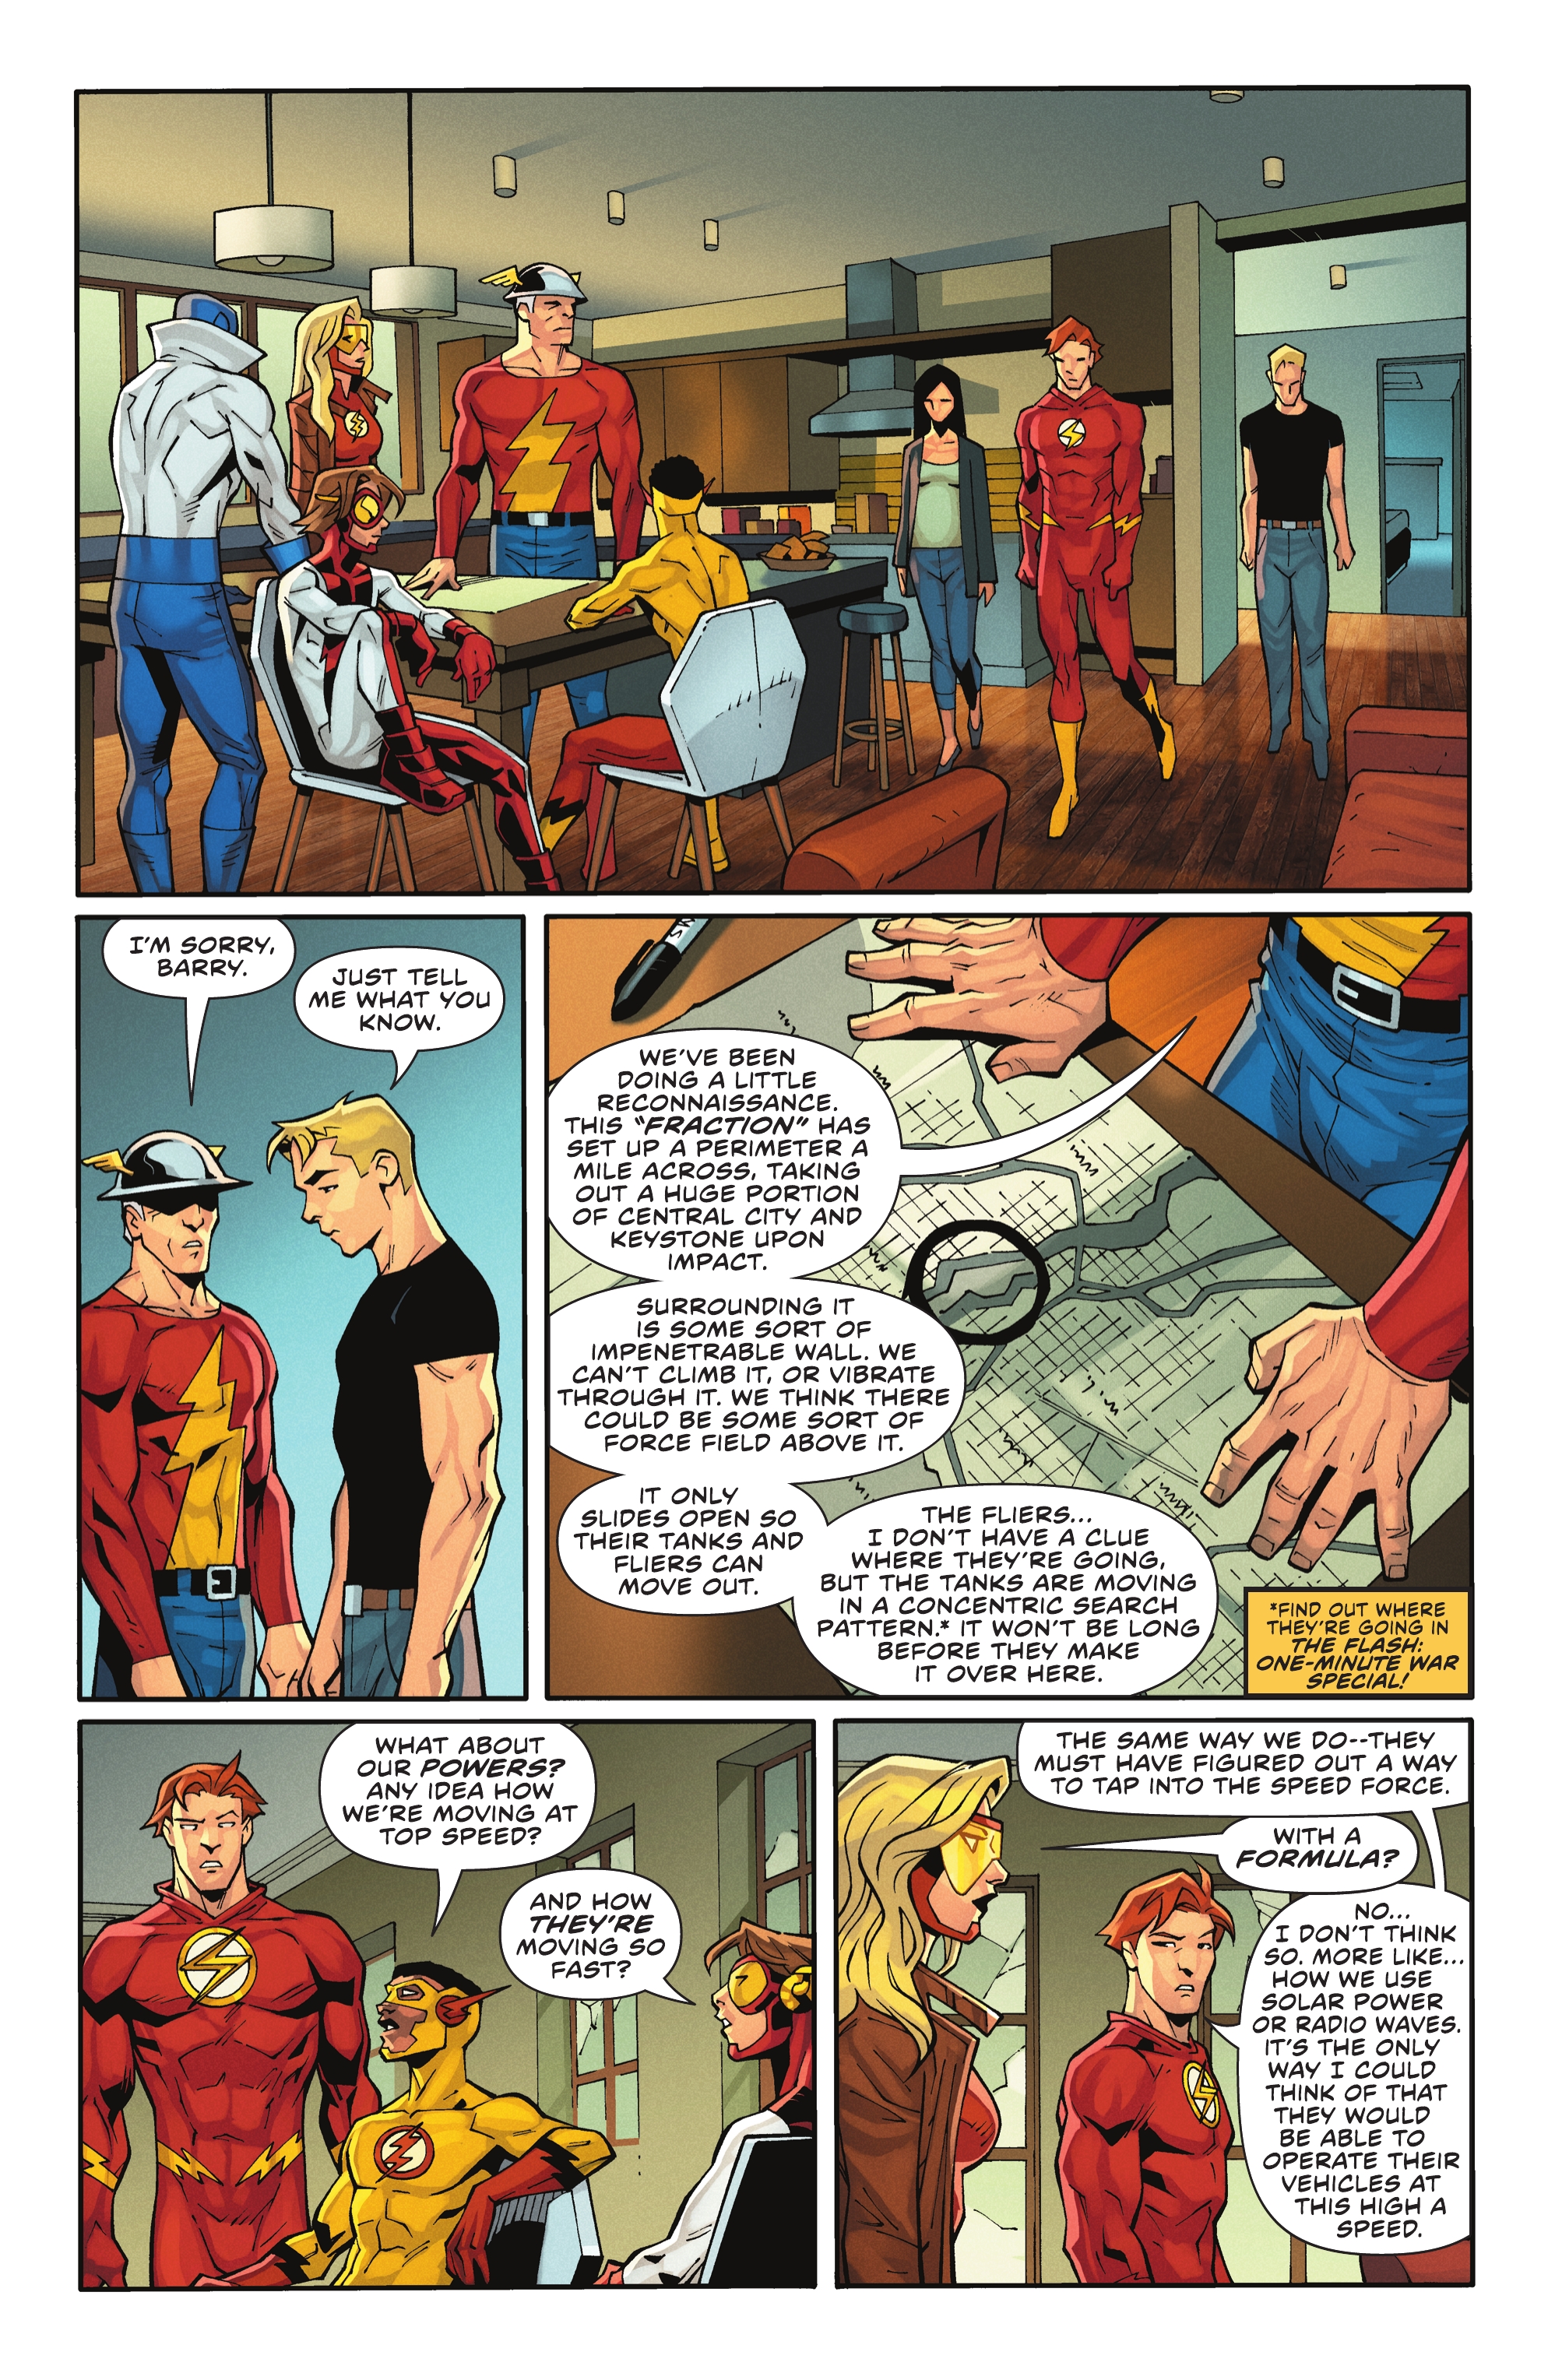 The Flash (2016-): Chapter 792 - Page 4